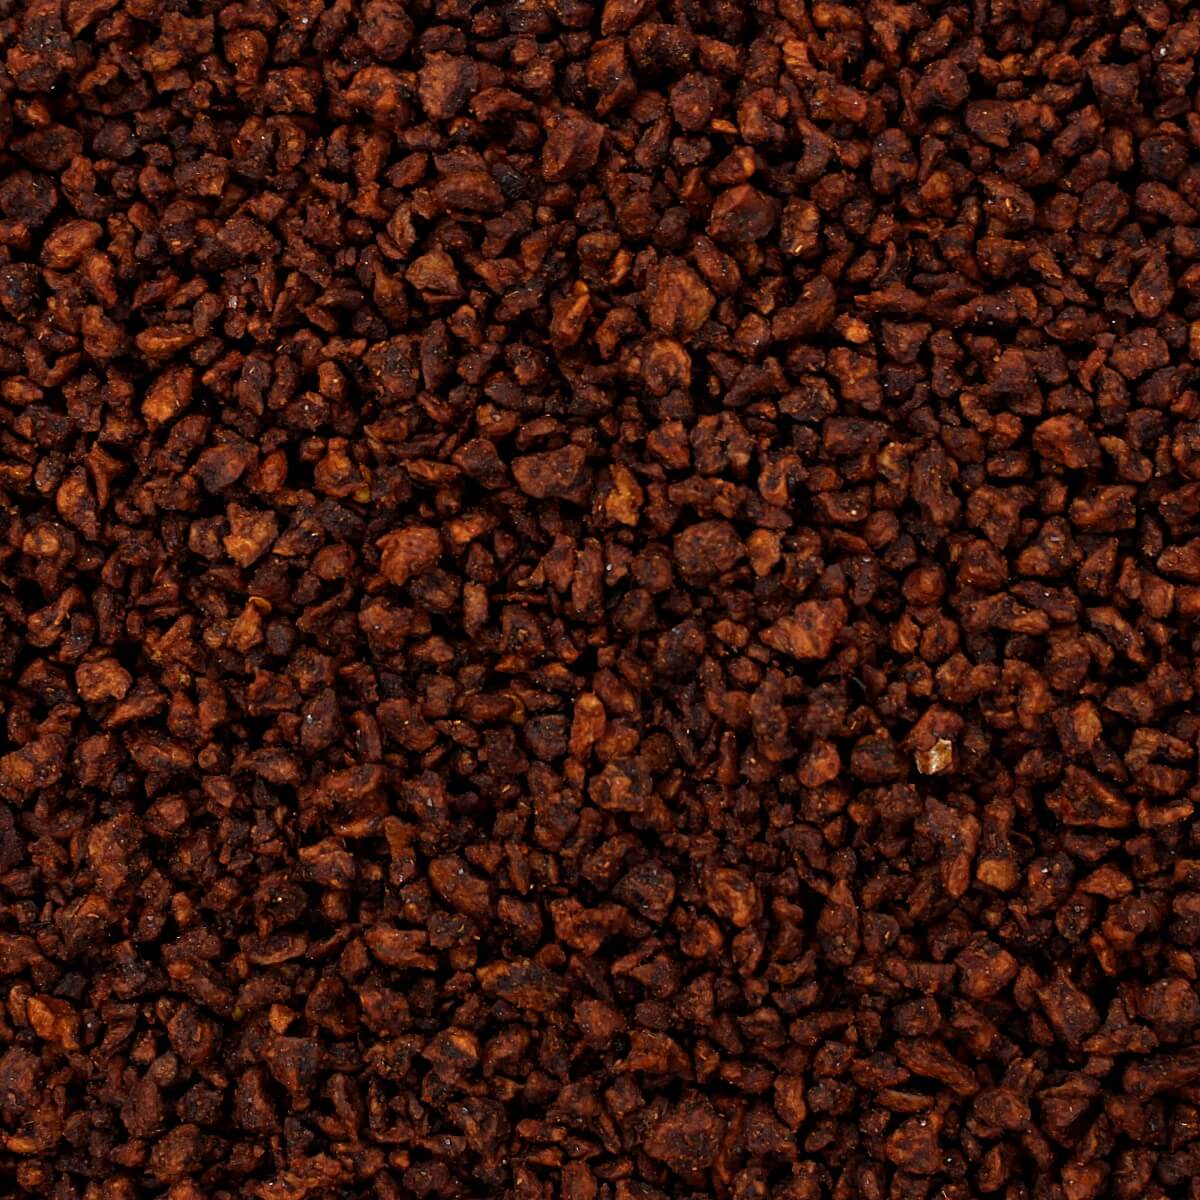 A close up image of a coffee bean.